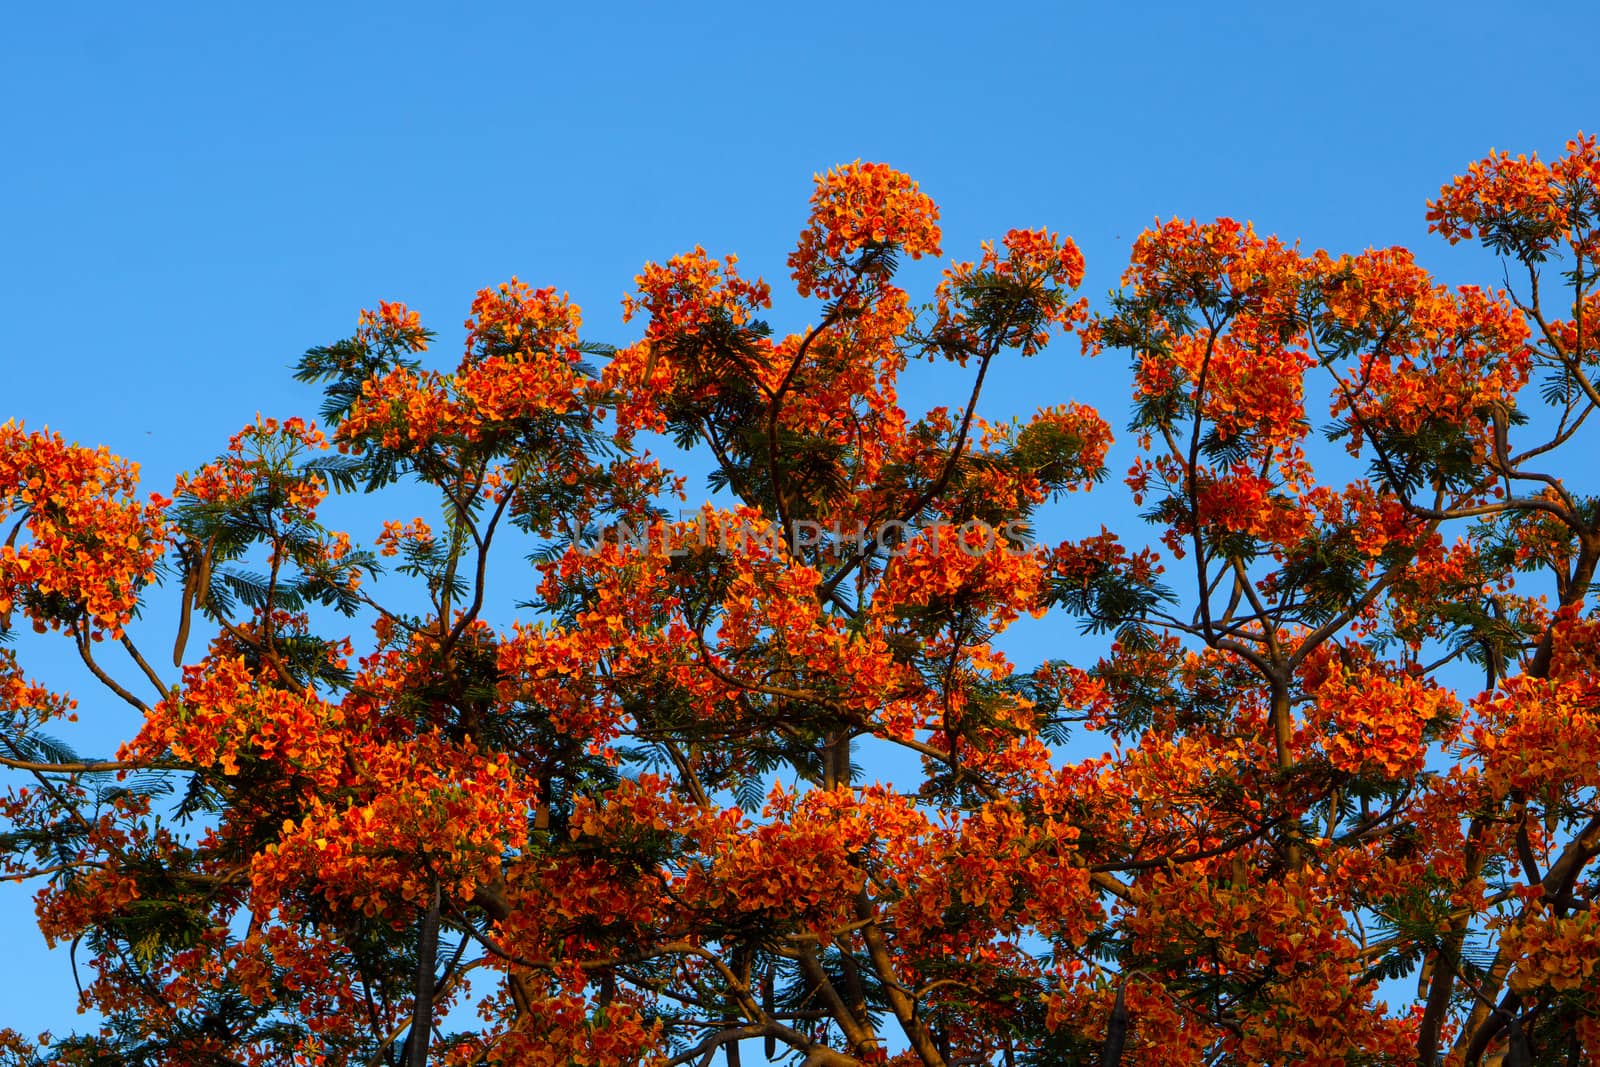 View of Orange Royal Poinciana in blue sky background.